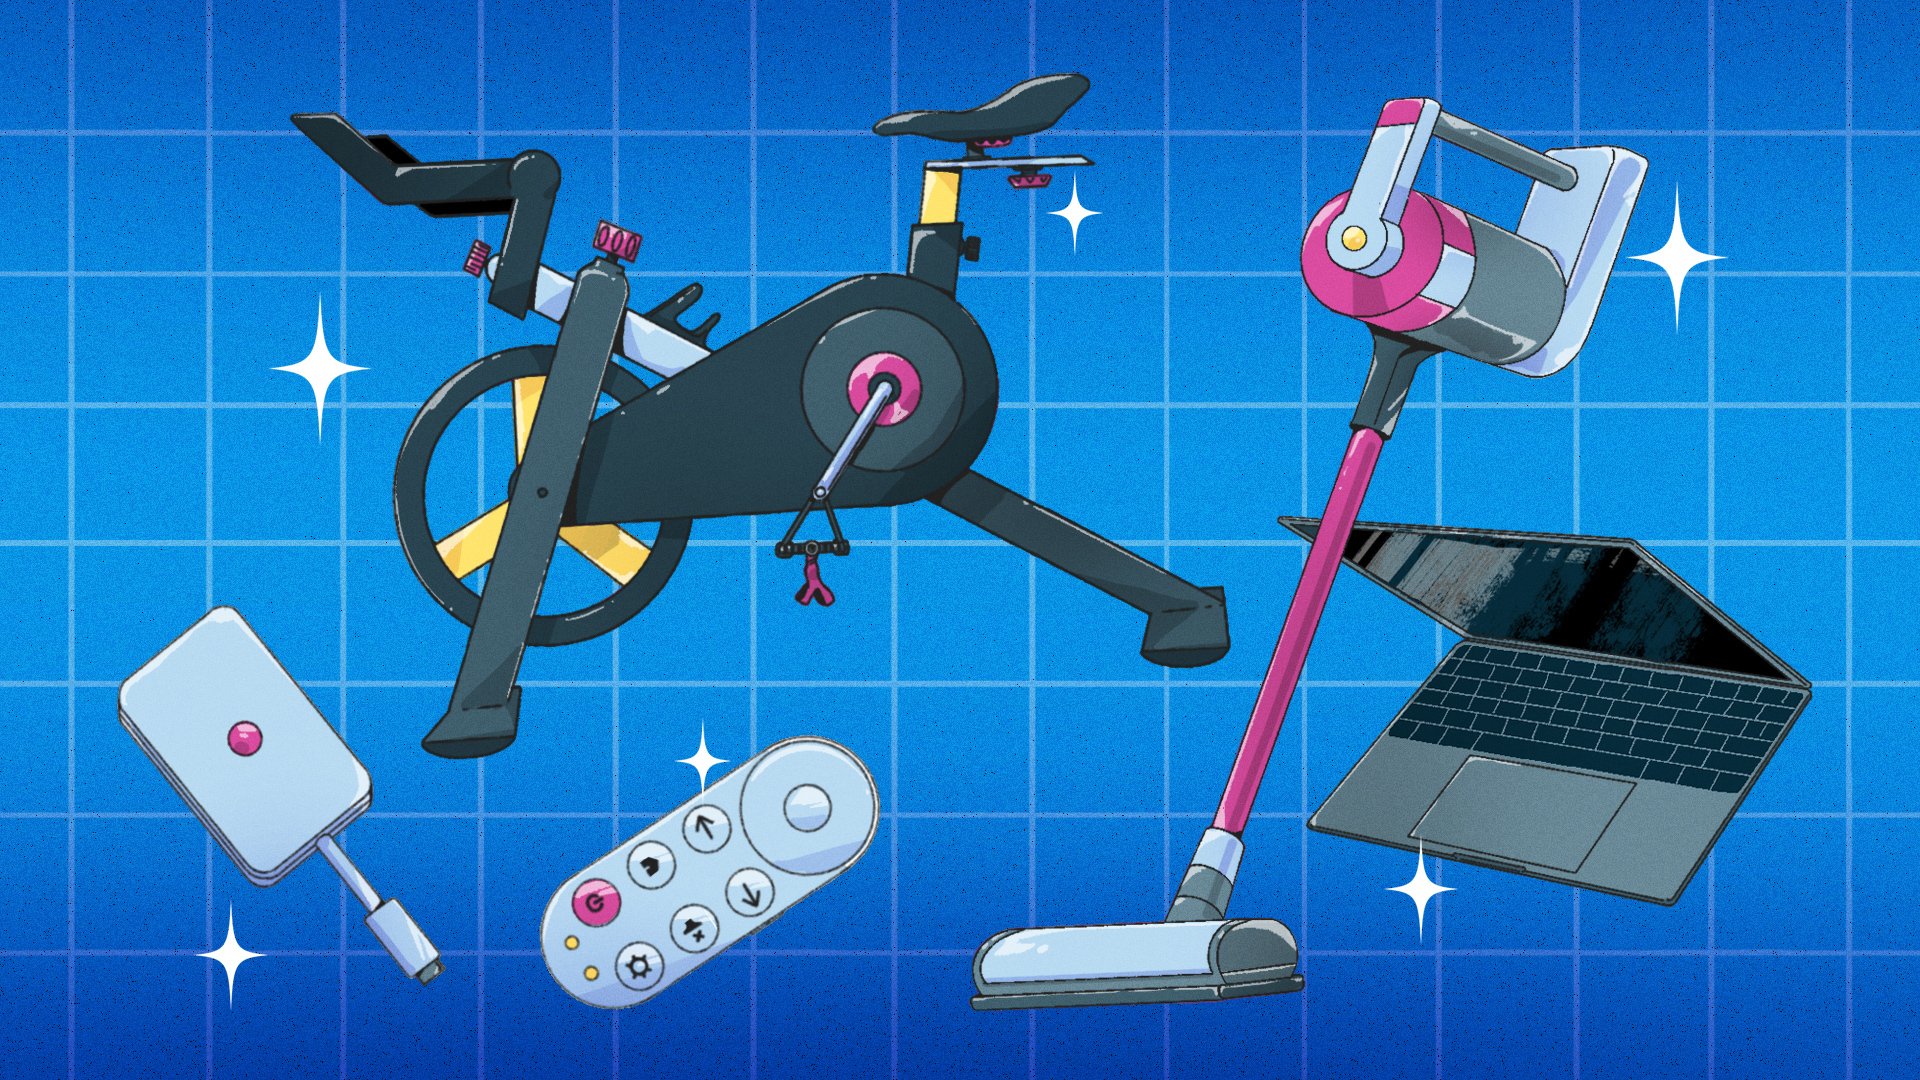 an exercise bike, a vacuum, and other consumer tech products